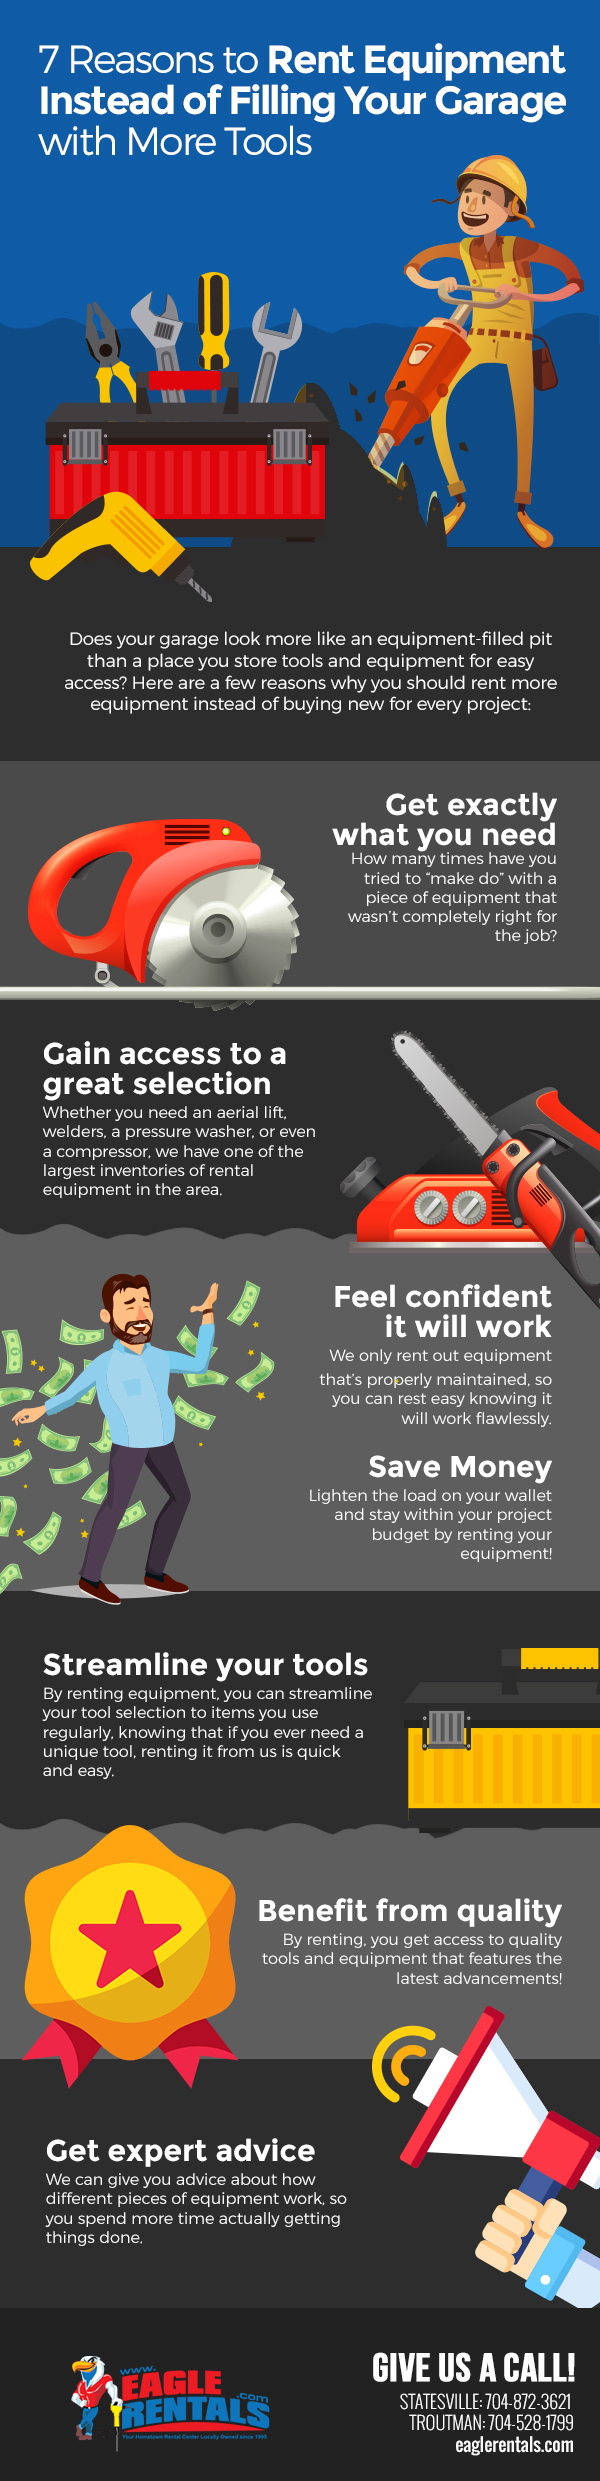 7 Reasons to Rent Equipment Instead of Filling Your Garage with More Tools [infographic]